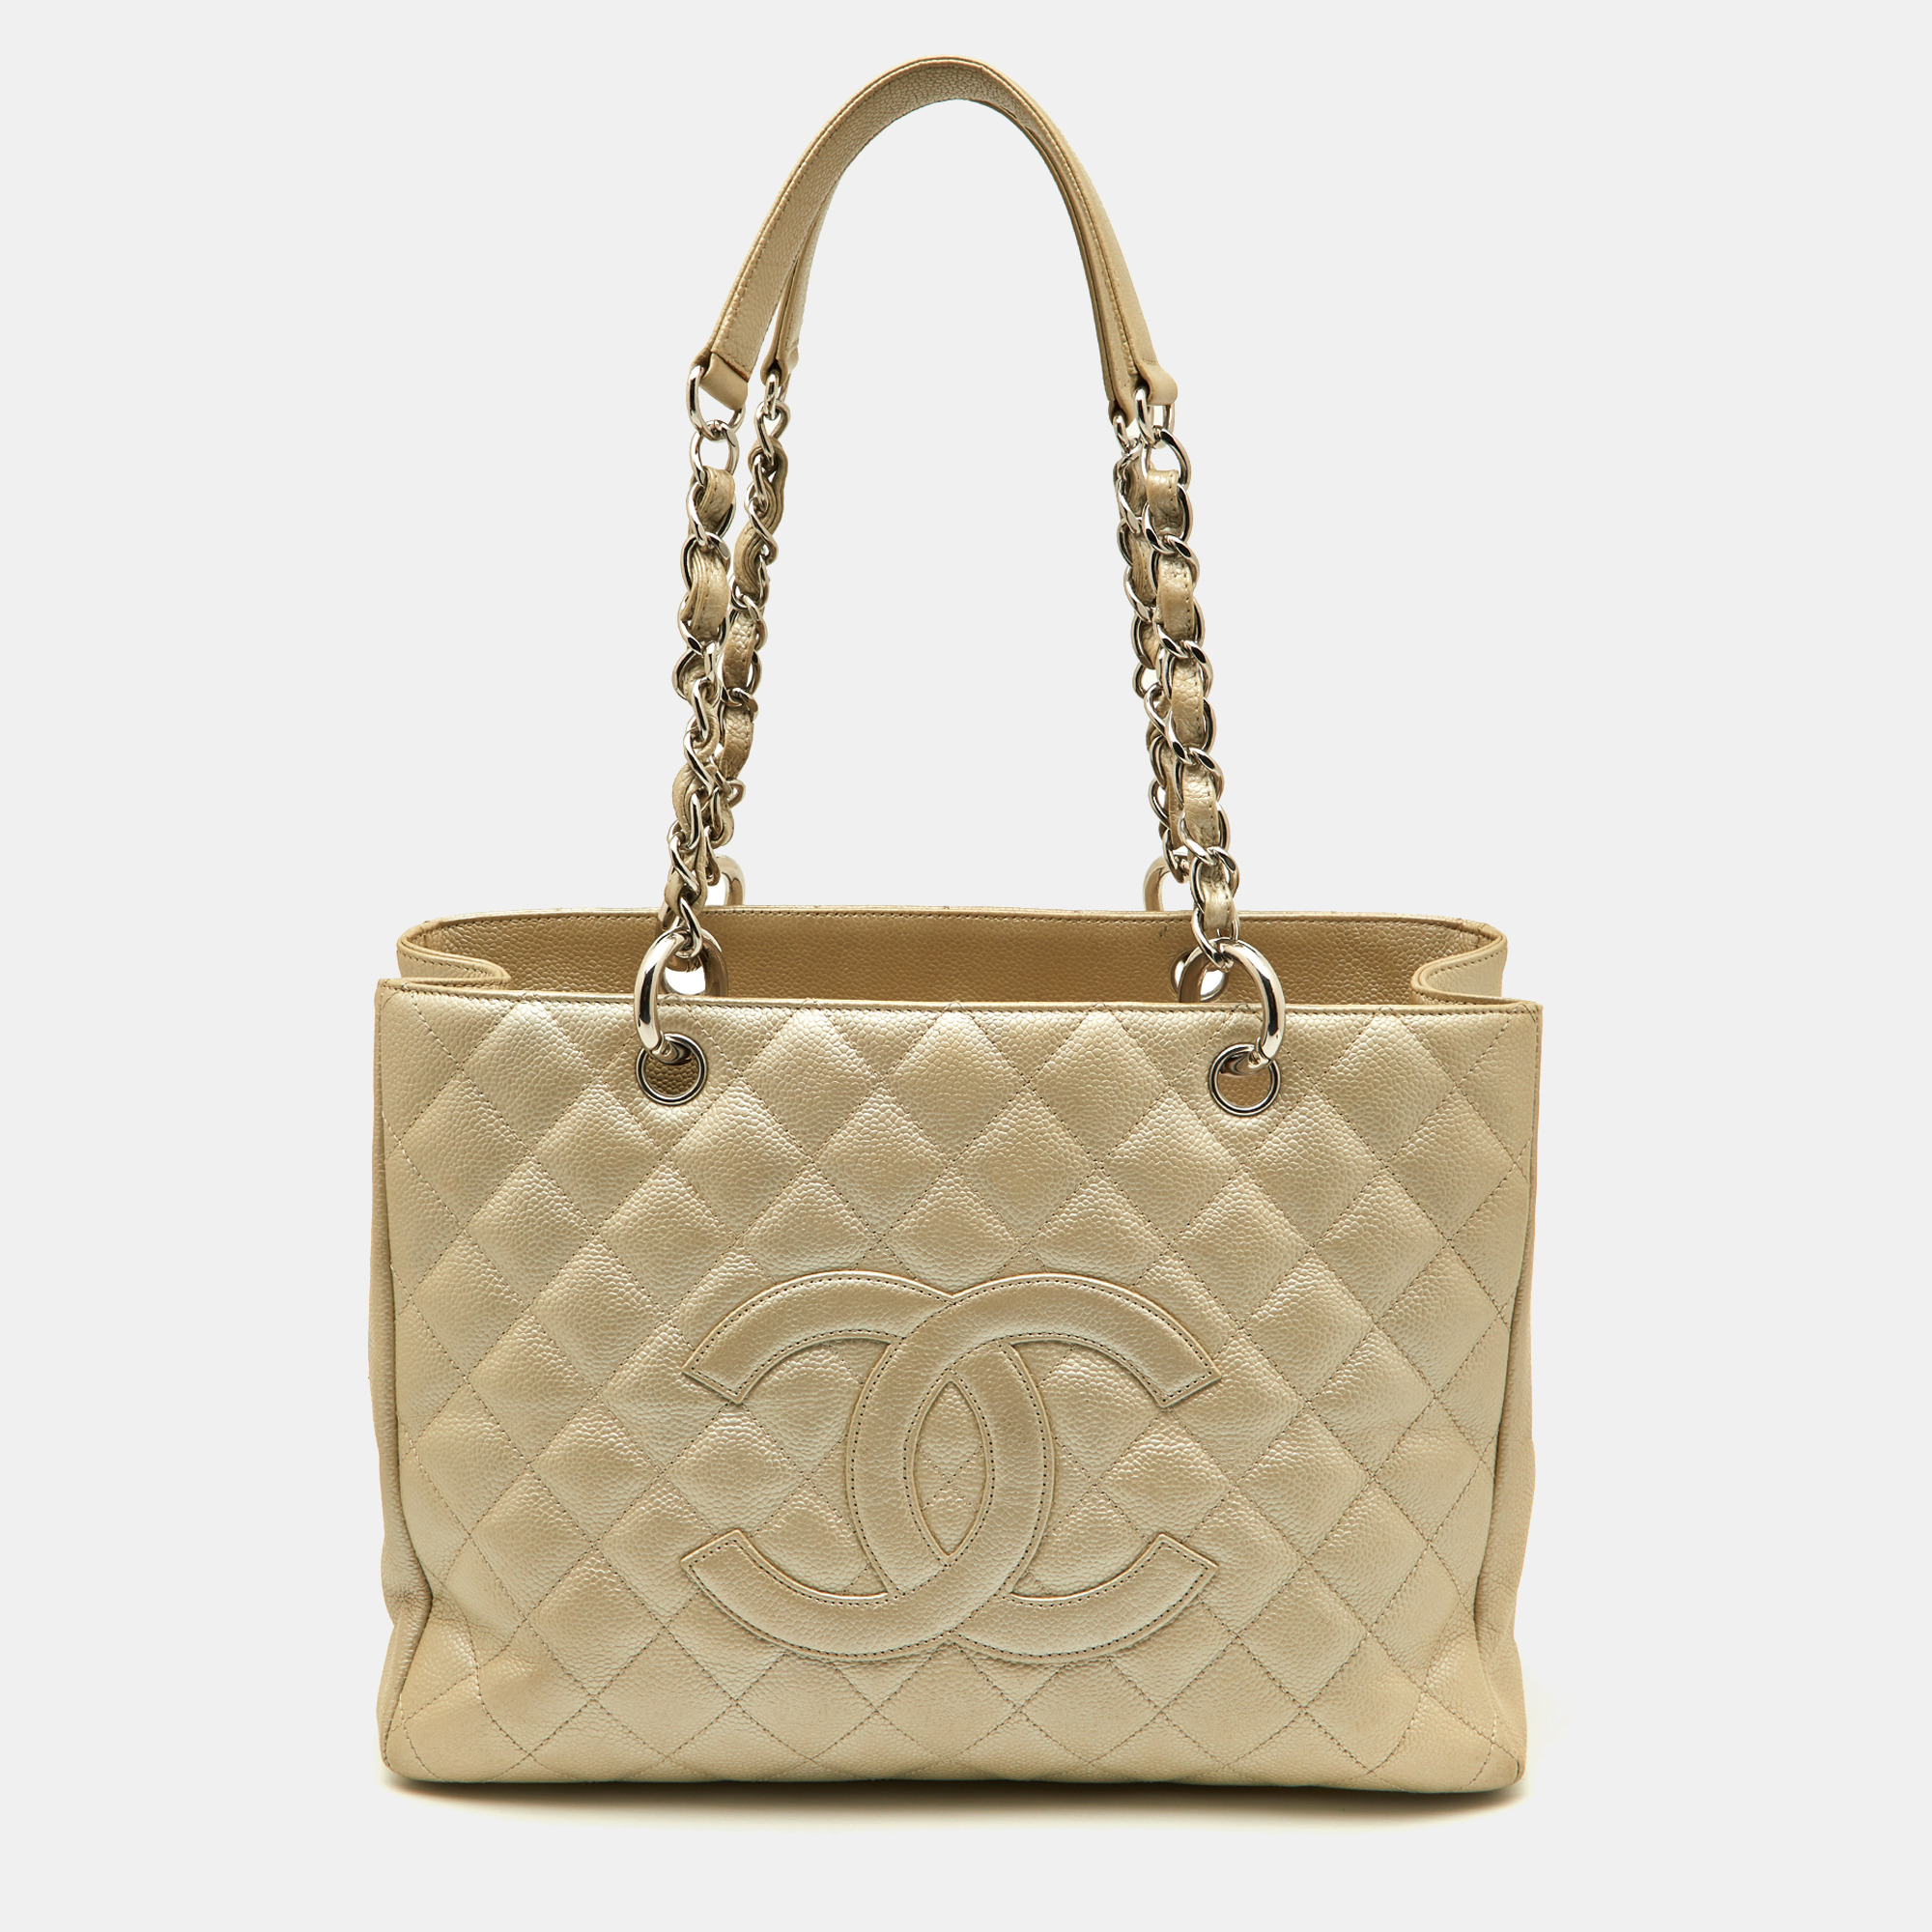 Pre-owned Chanel Pearl White Quilted Caviar Leather Gst Shopper Tote